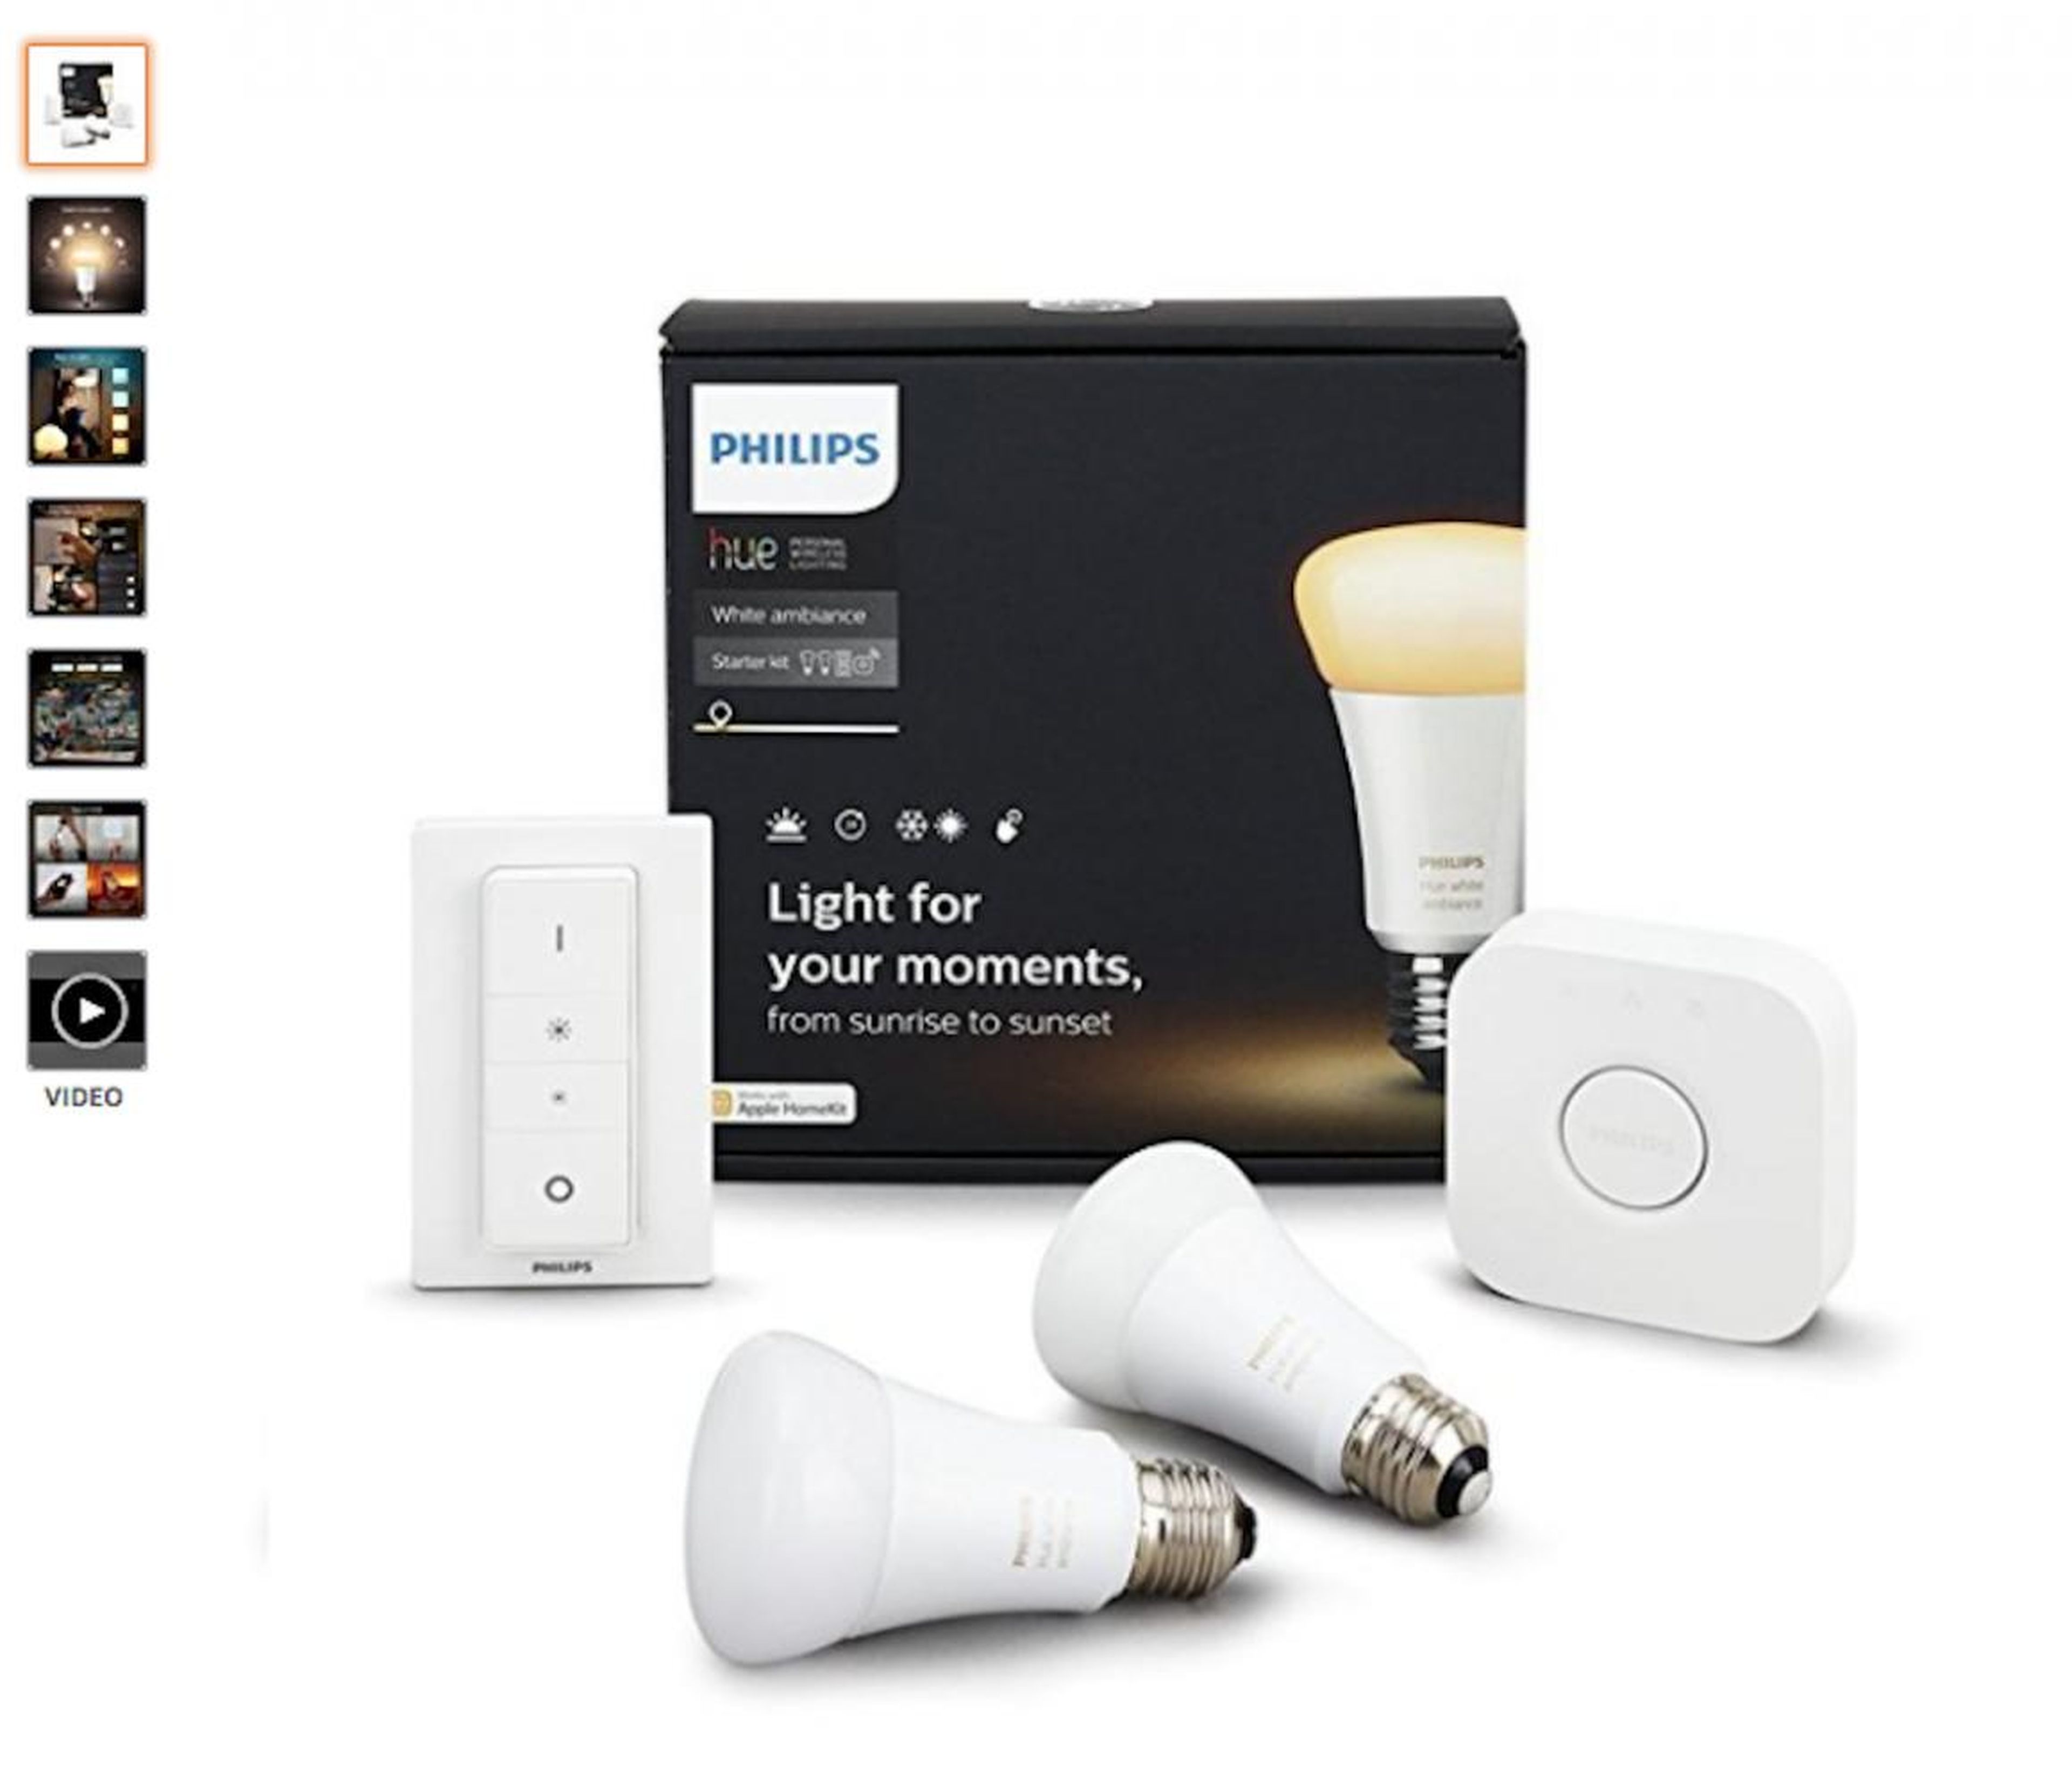 They also bought a lot of <a href="https://amzn.to/2uu6LQy">Philips Hue light bulbs</a>.